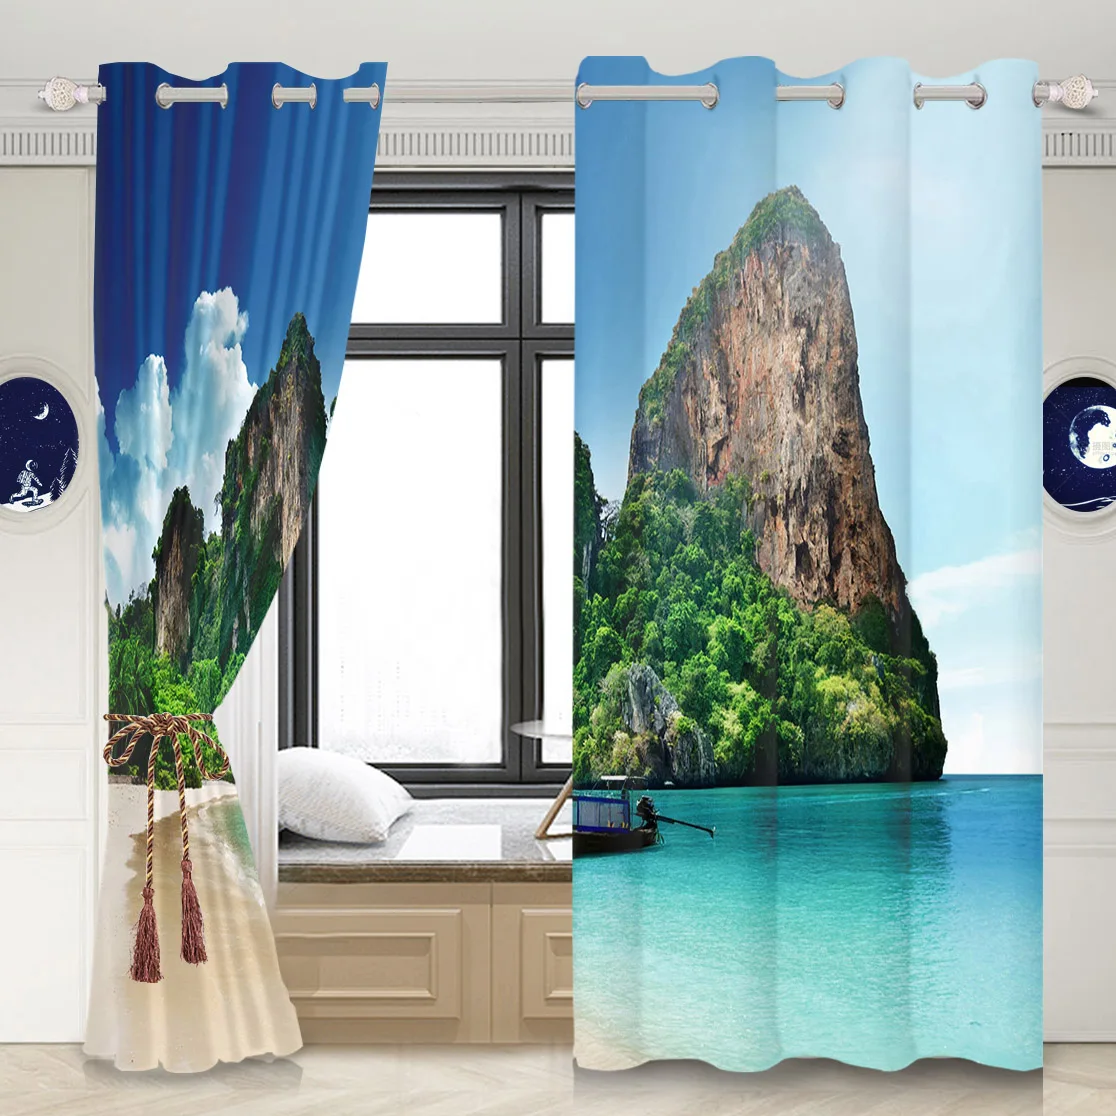 

3D Printing Seaside Sunny Beach Curtains Island Pattern Window Drapes Perforated Blackout Treatment Cortinas Polyester